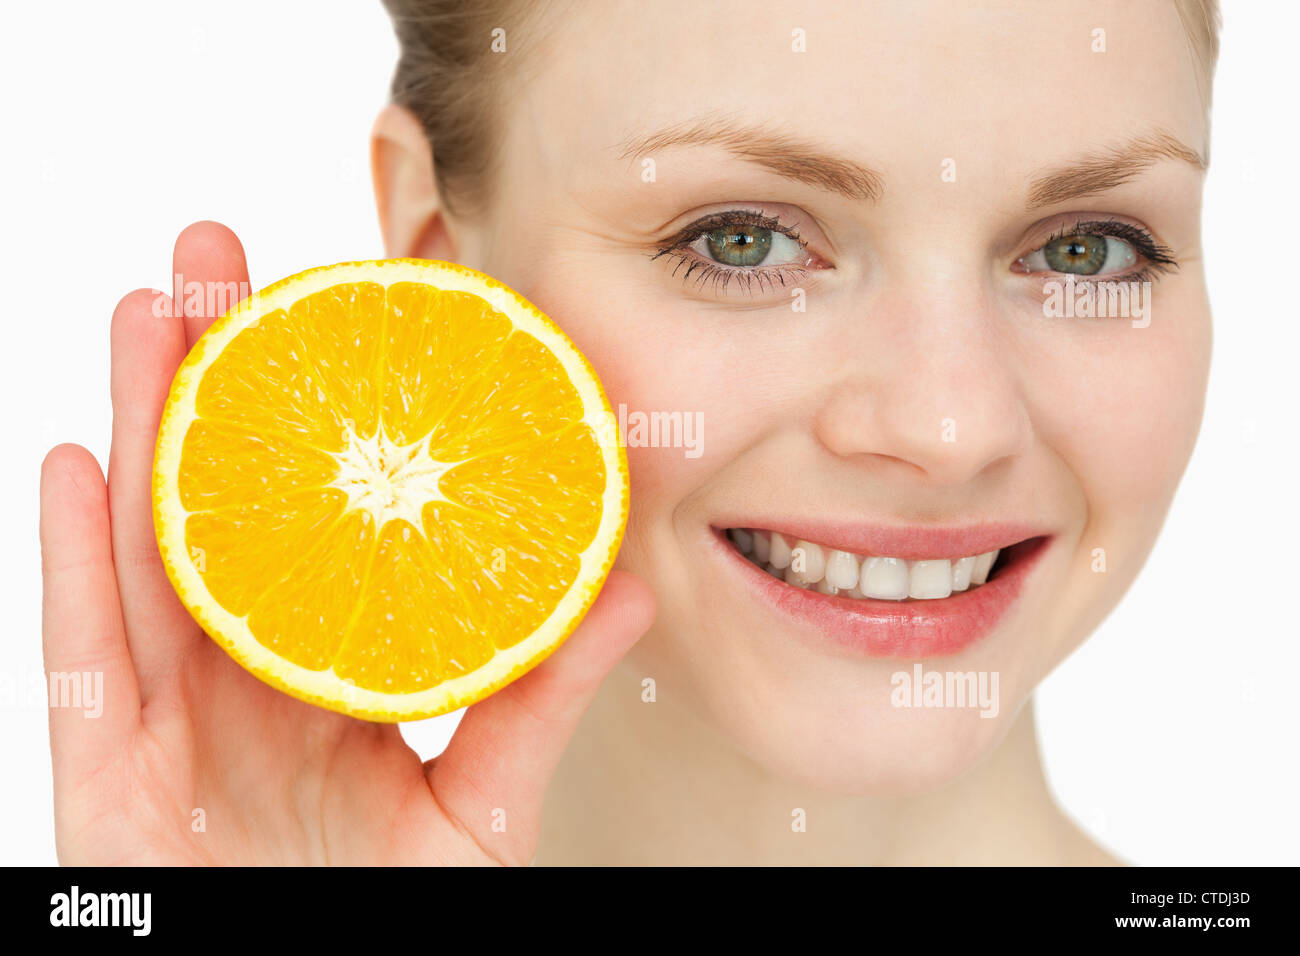 Blond-haired woman presenting an orange Stock Photo